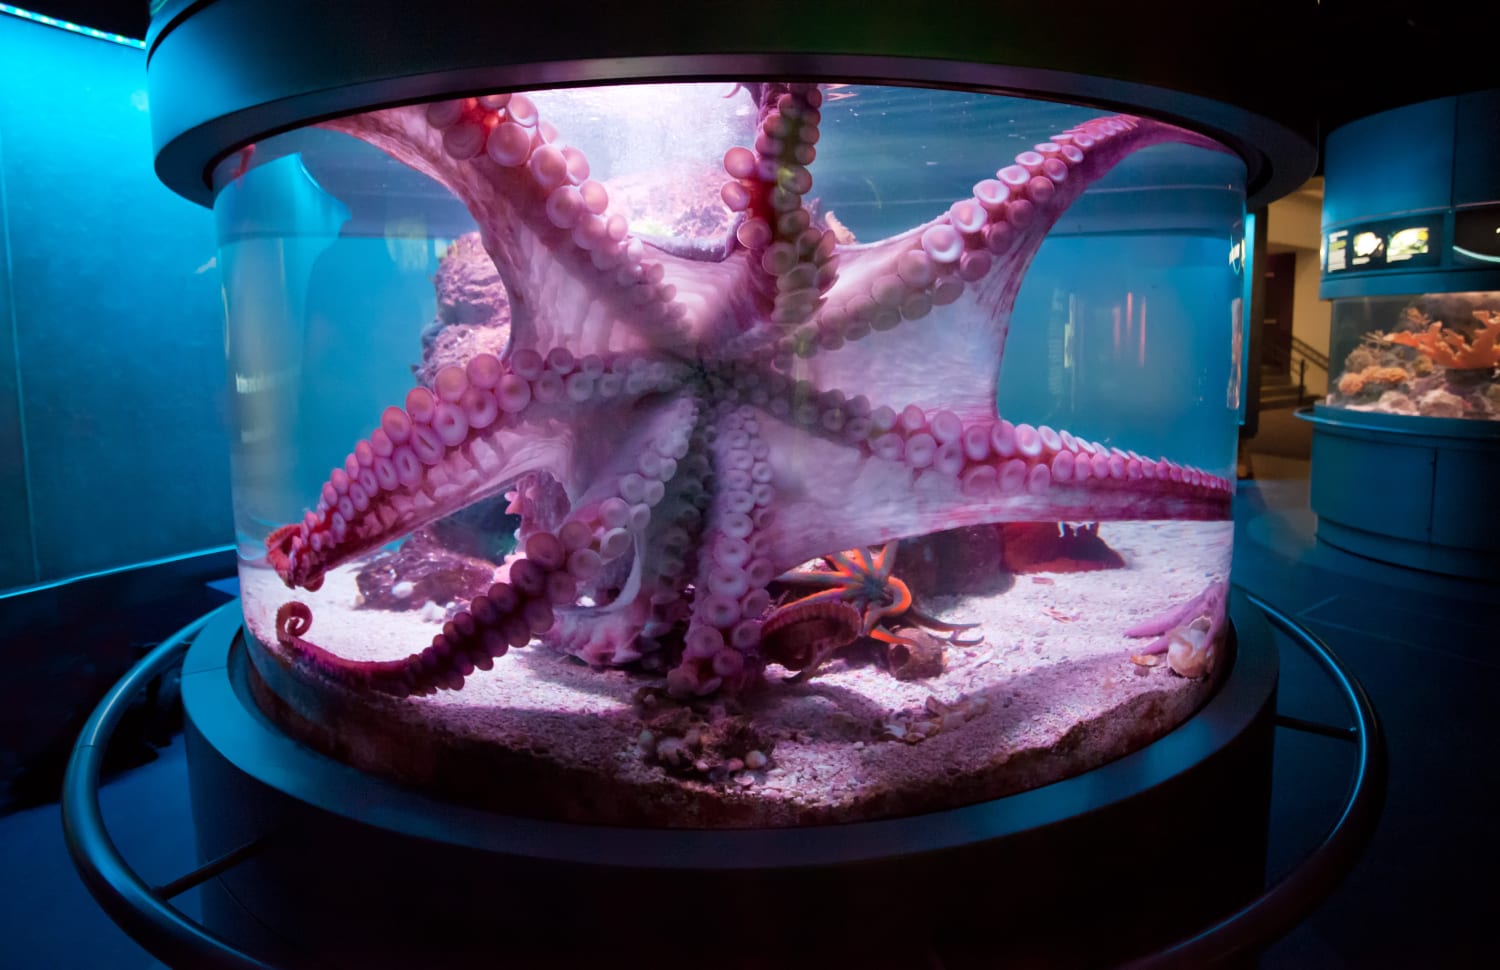 Not all individual octopuses are the same. Scientists have documented different individual preferences among giant Pacific octopuses and others. Octopus are very intelligent and can learn to open jars, solve puzzles and interact with caretakers. [Largest on record was 600 pounds and 30 feet across.]